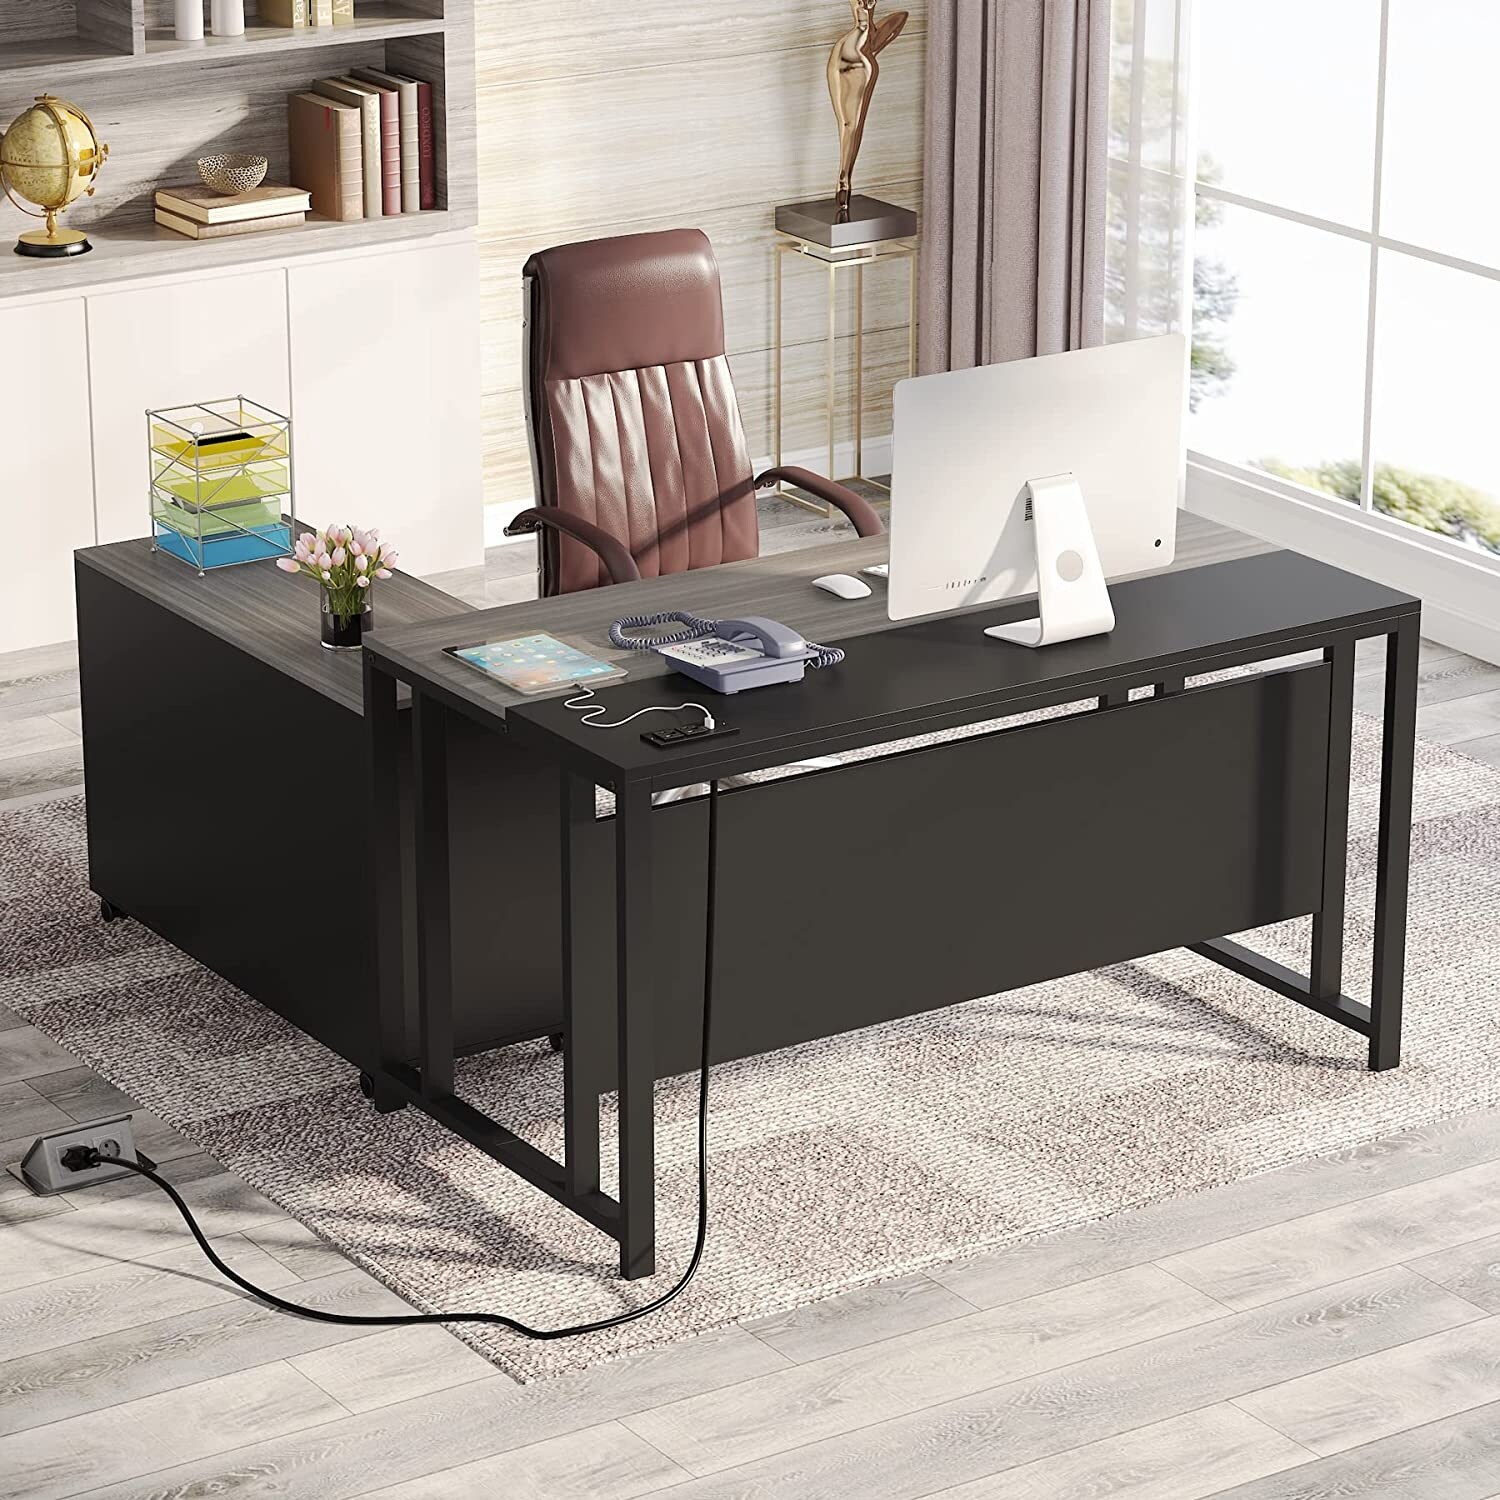 https://ak1.ostkcdn.com/images/products/is/images/direct/e9965a3e26dfa432e7a2a71bf869554887c50ca3/L-Shaped-Desk-with-Power-Outlet-and-USB-Port%2C-55%22-Executive-Office-Desk-with-Lateral-File-Cabinet.jpg